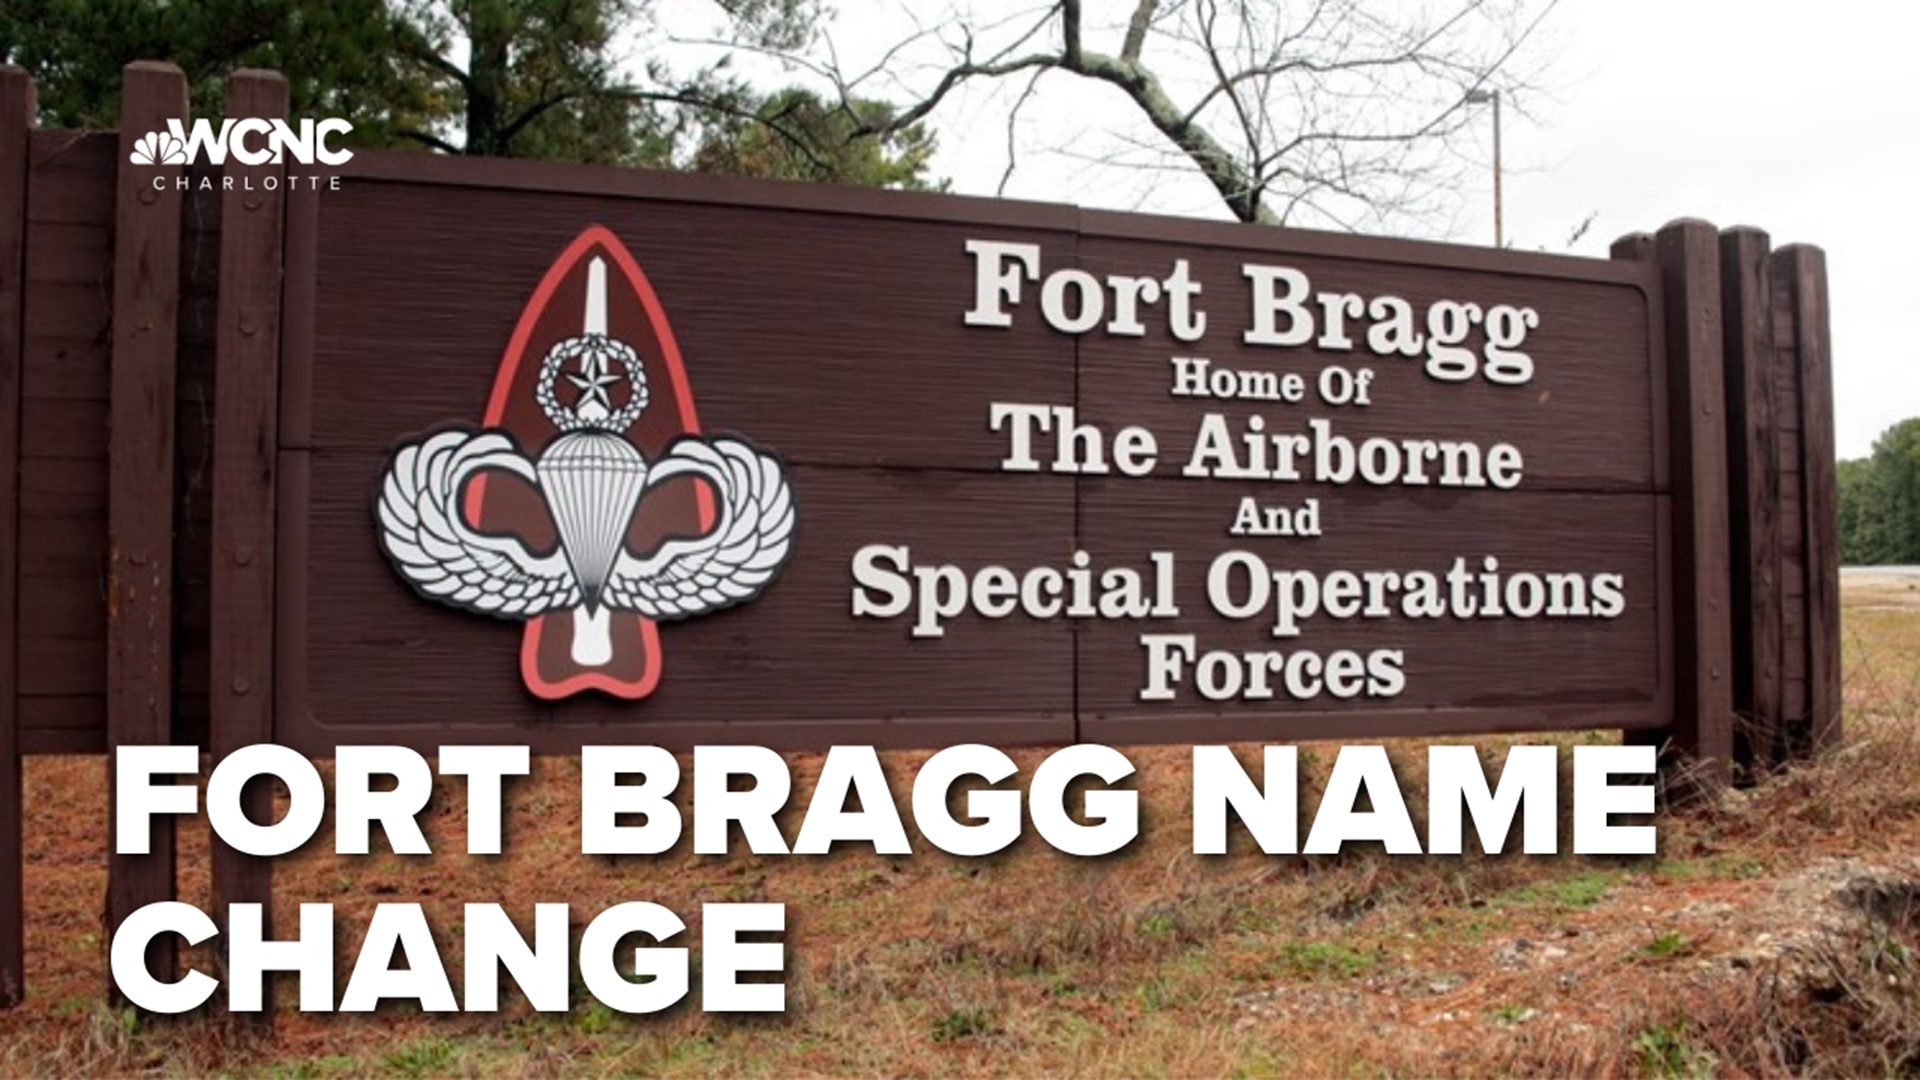 Fort Bragg is set to get a new name this year.